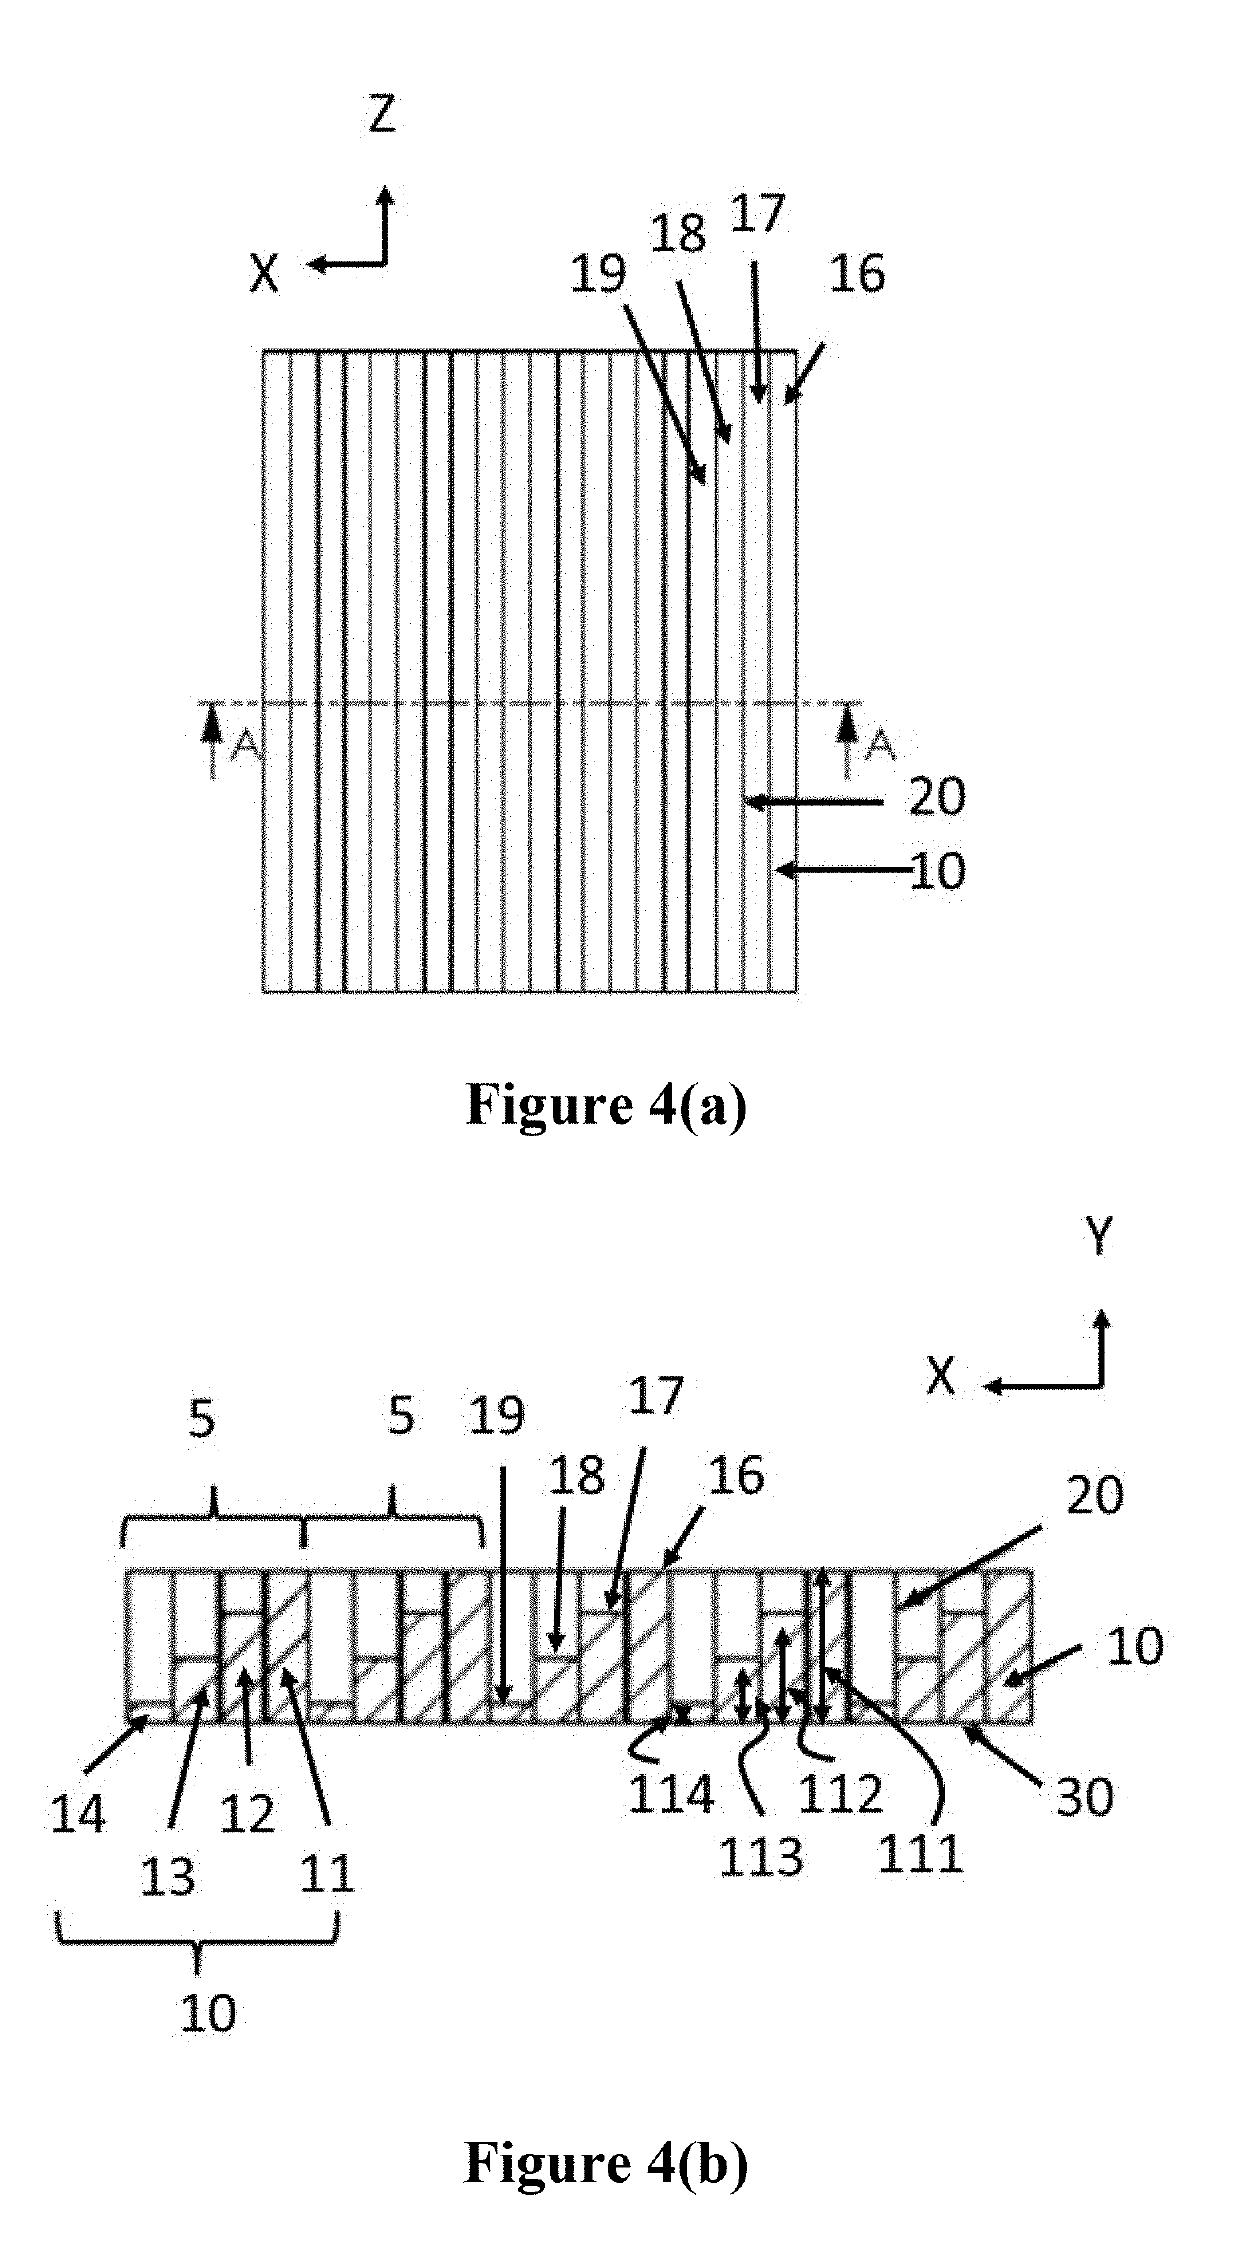 Sound absorber with stair-stepping structure